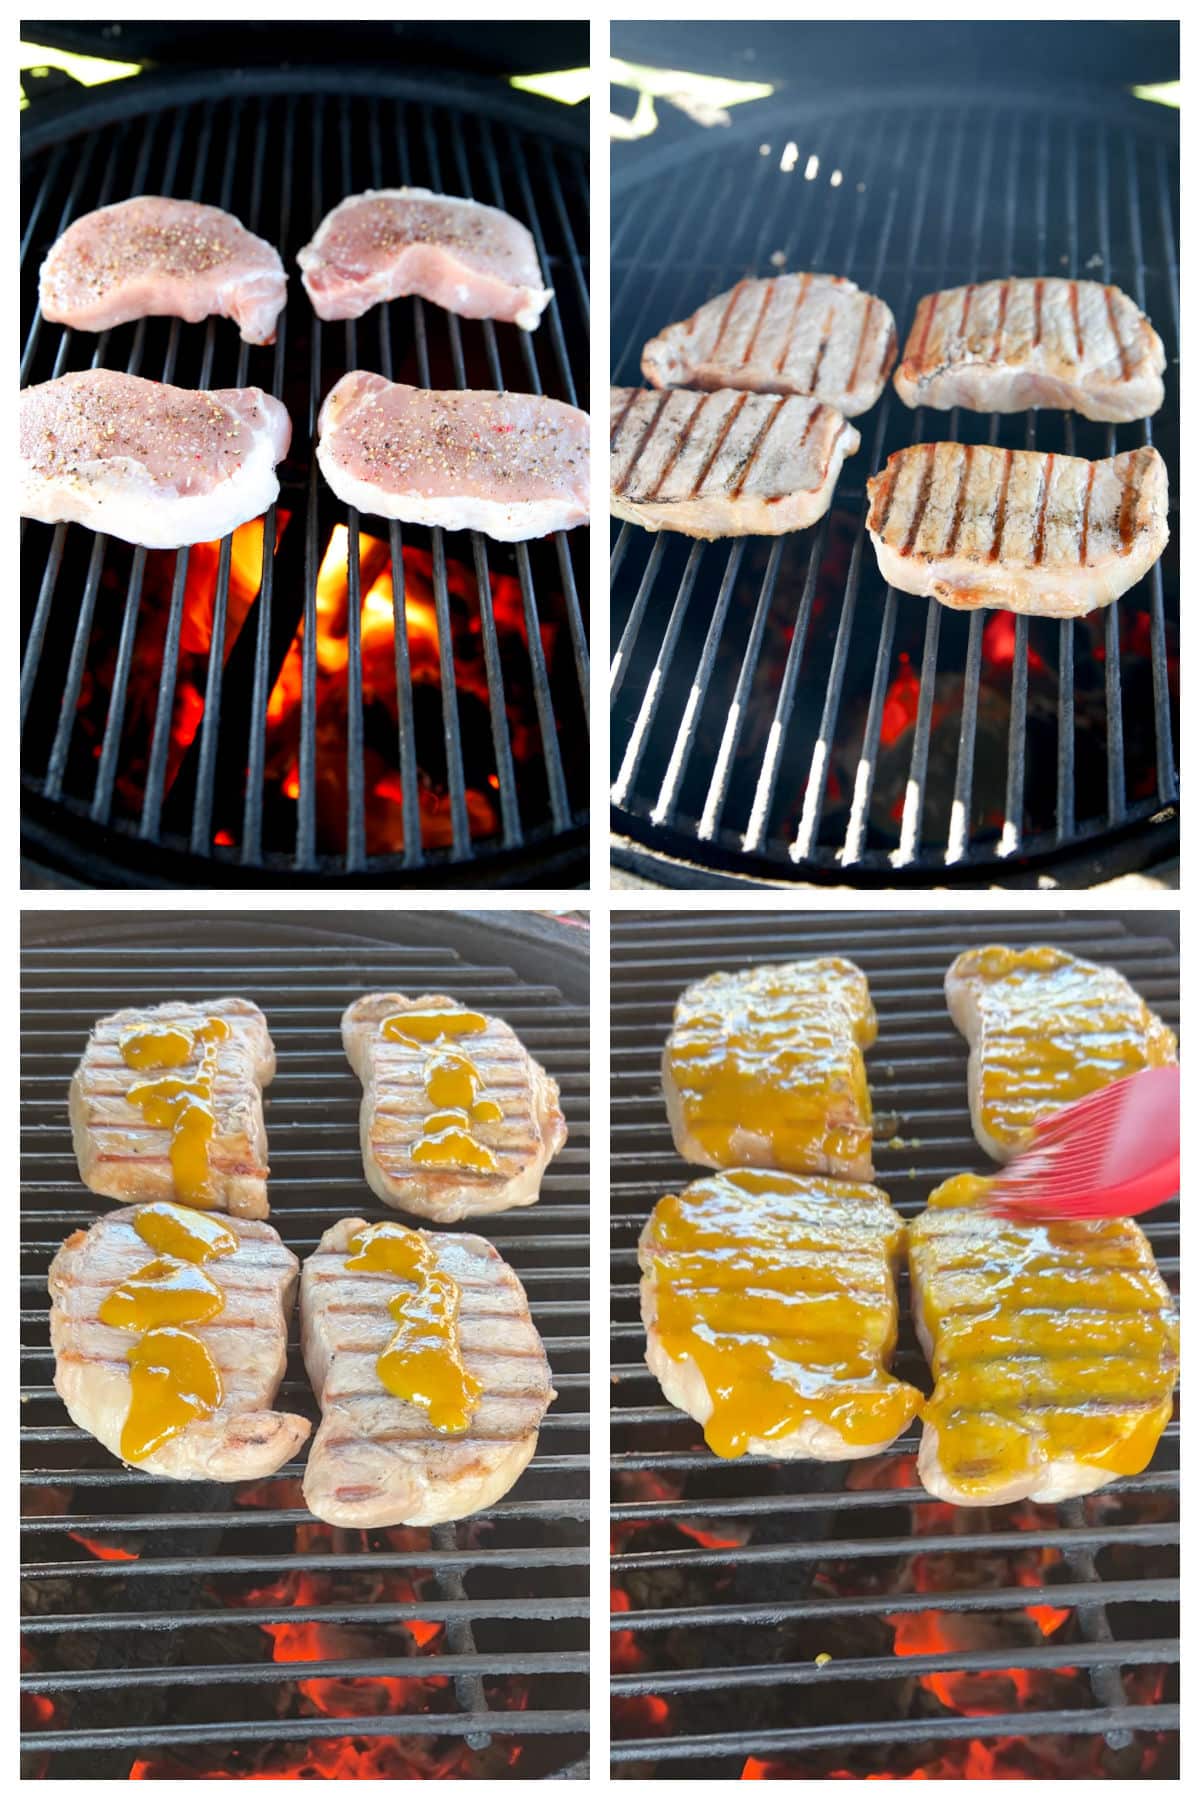 Grilling pork chops and glazing with sweet mustard collage.